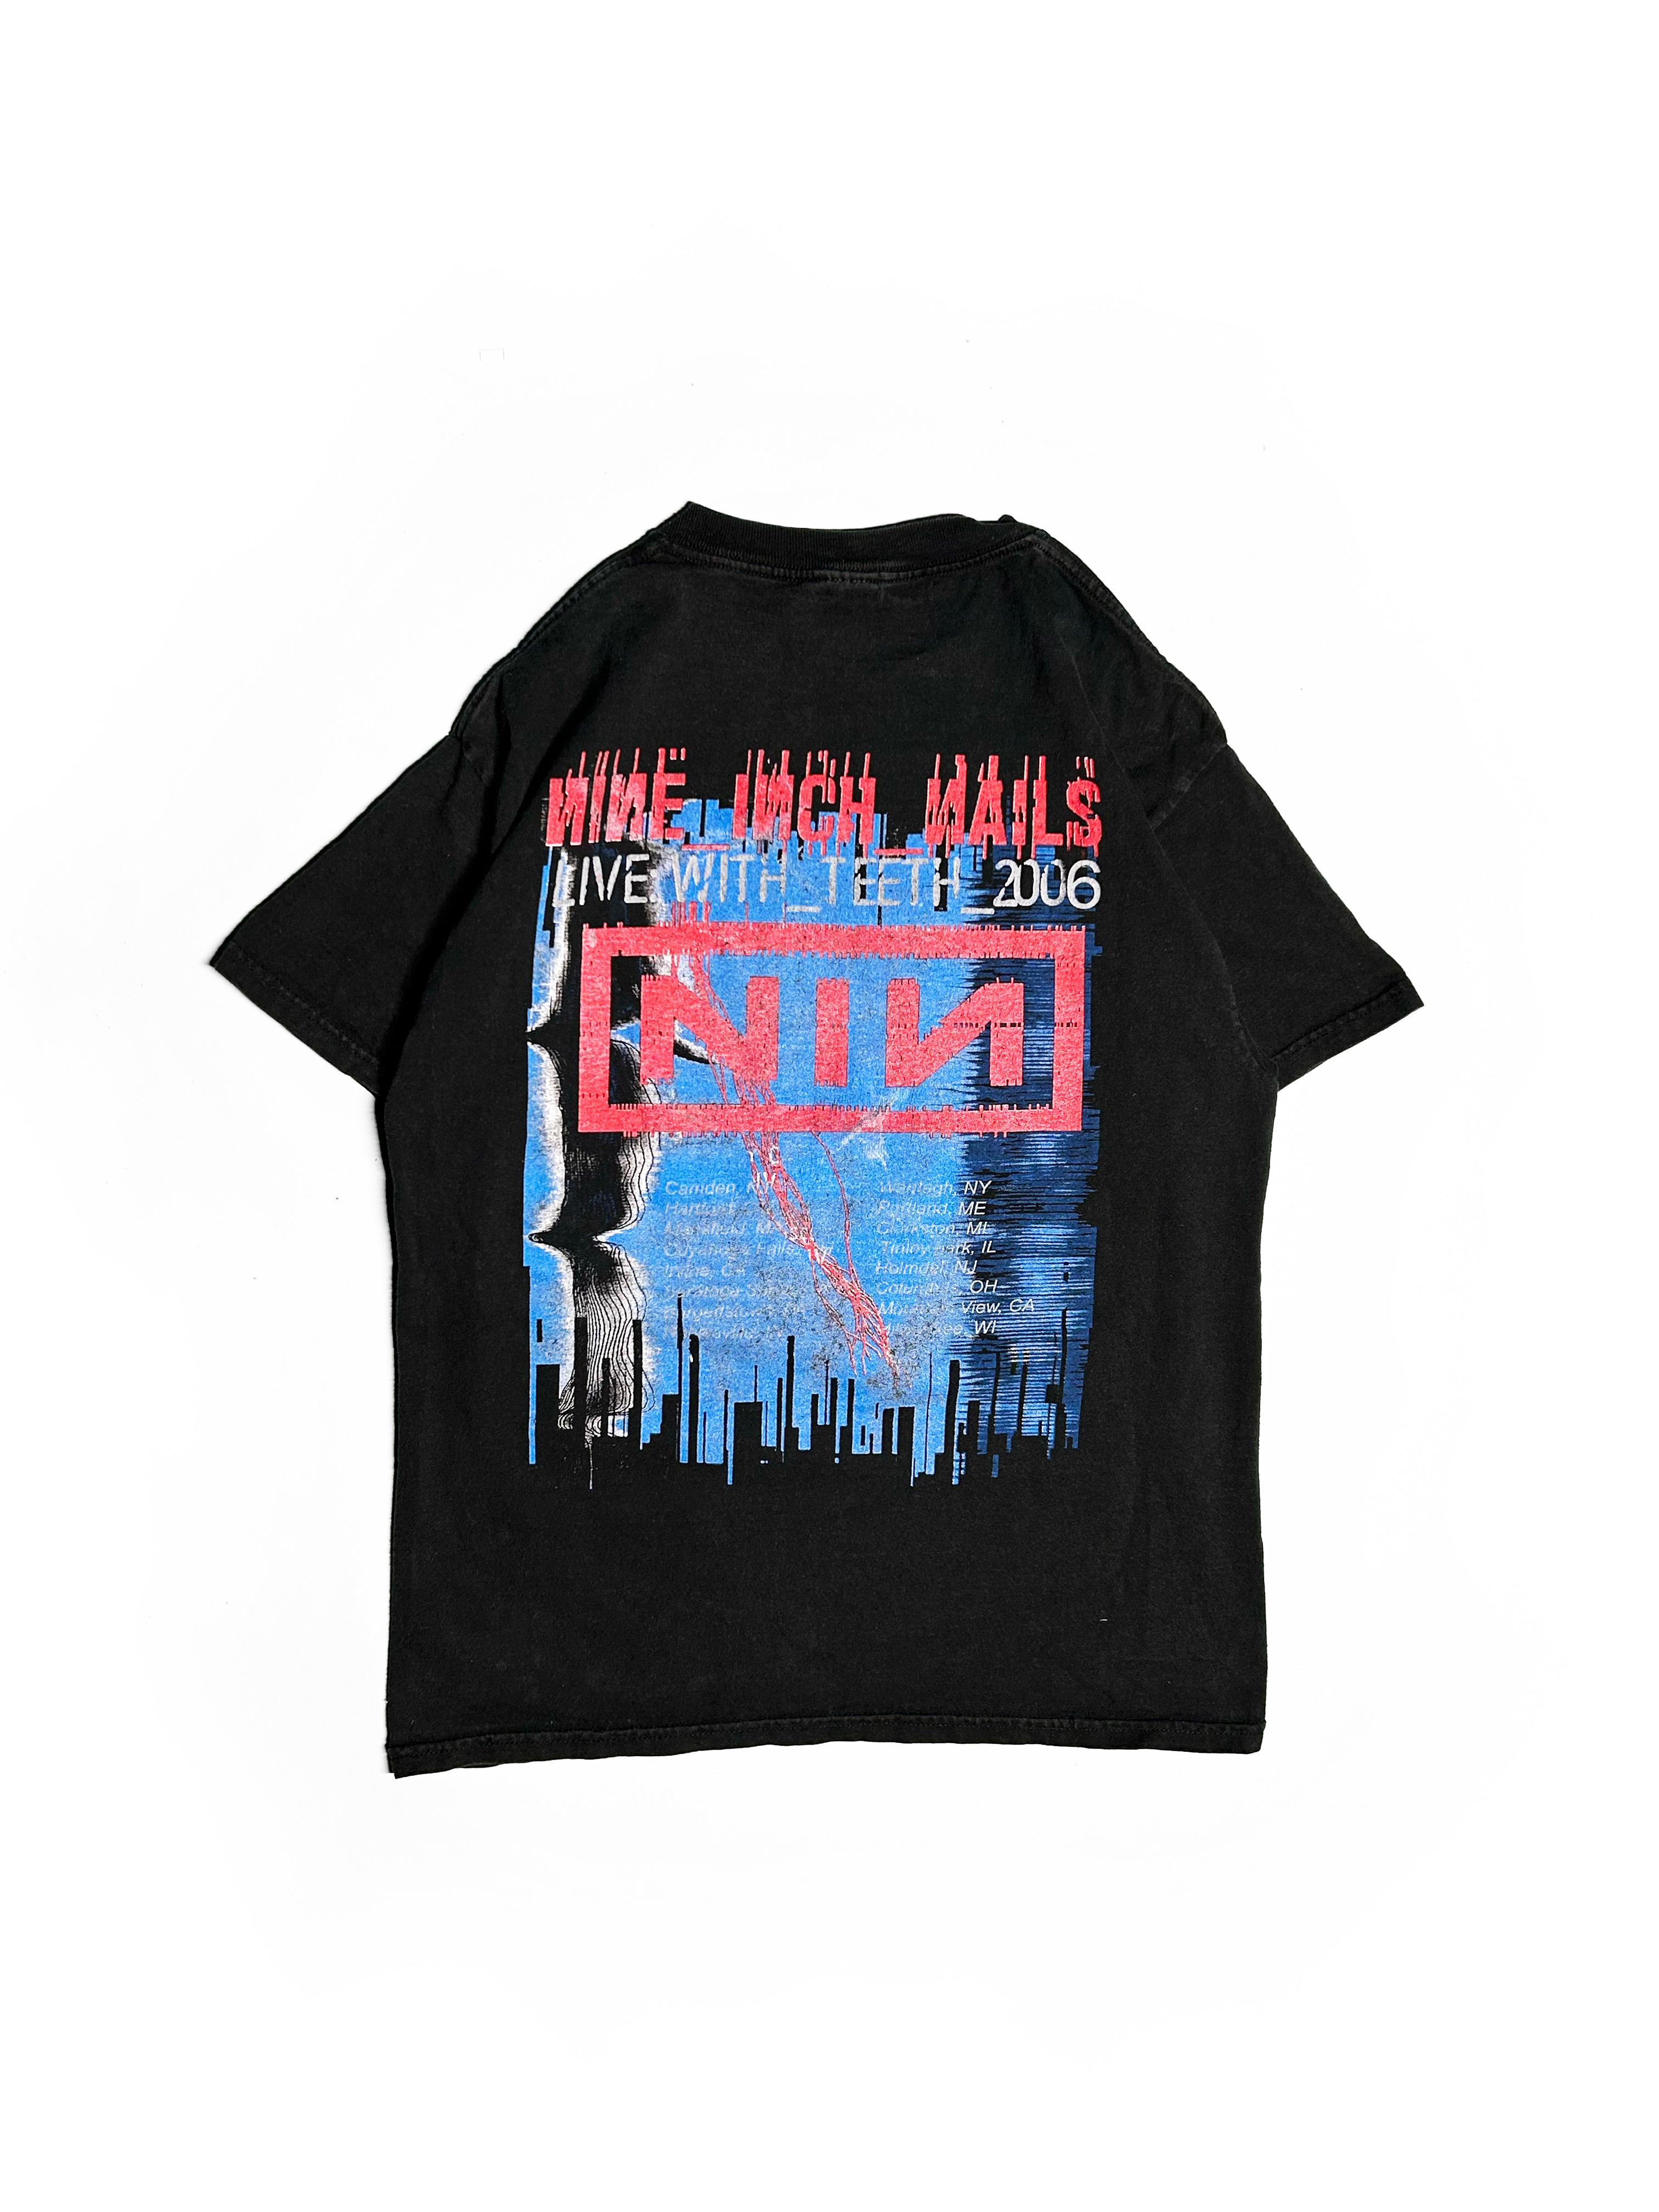 2006 Nine Inch Nails With Teeth Tour T-Shirt